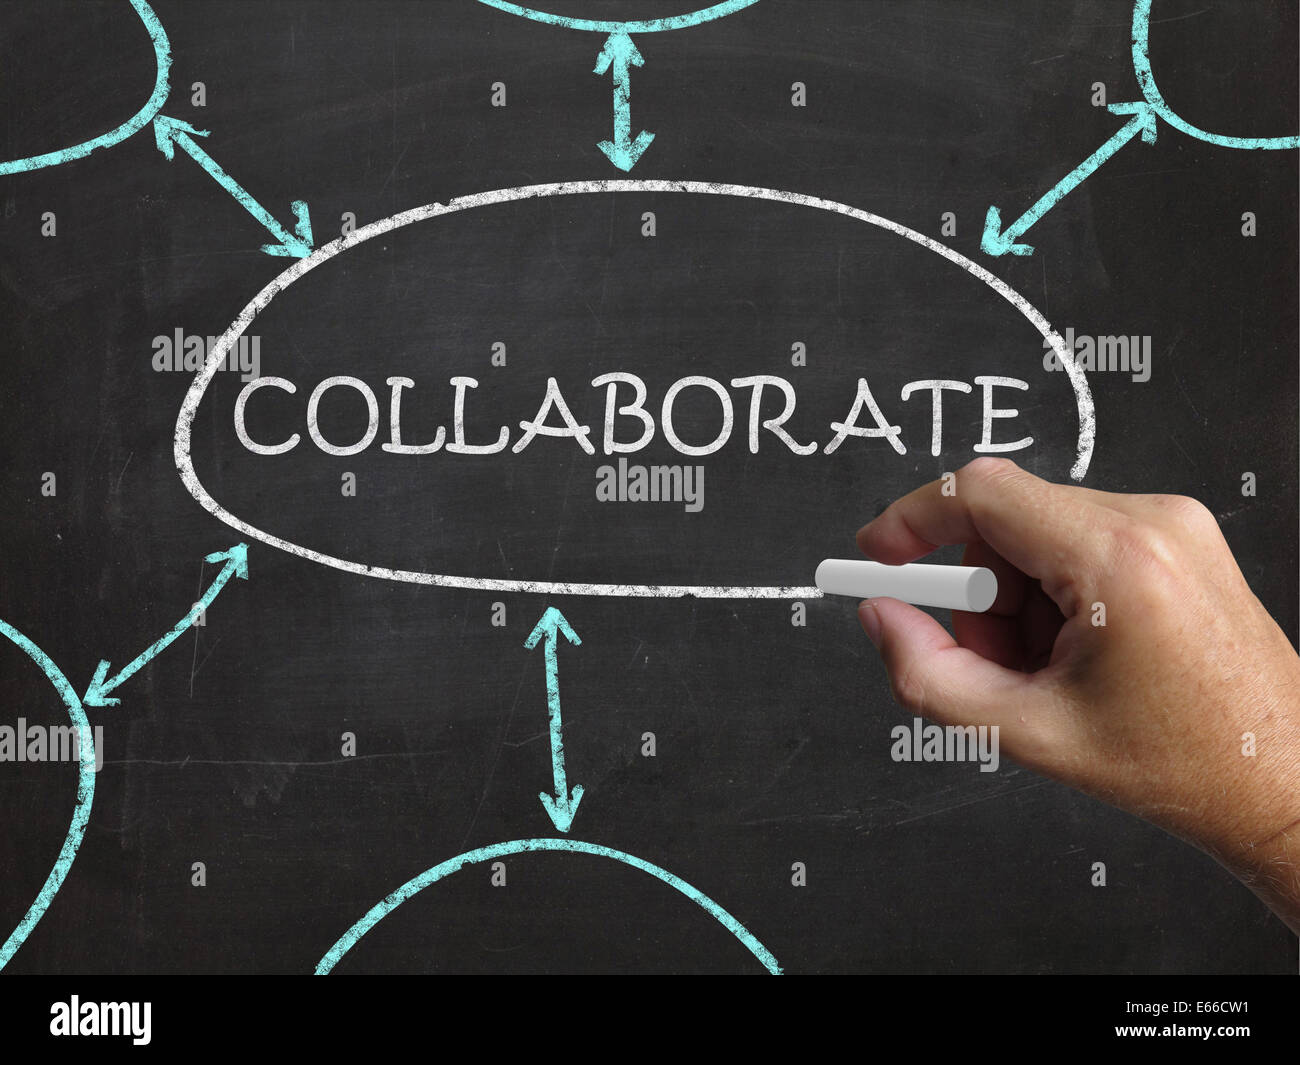 Collaborate Blackboard Showing Working Together And Synergy Stock Photo